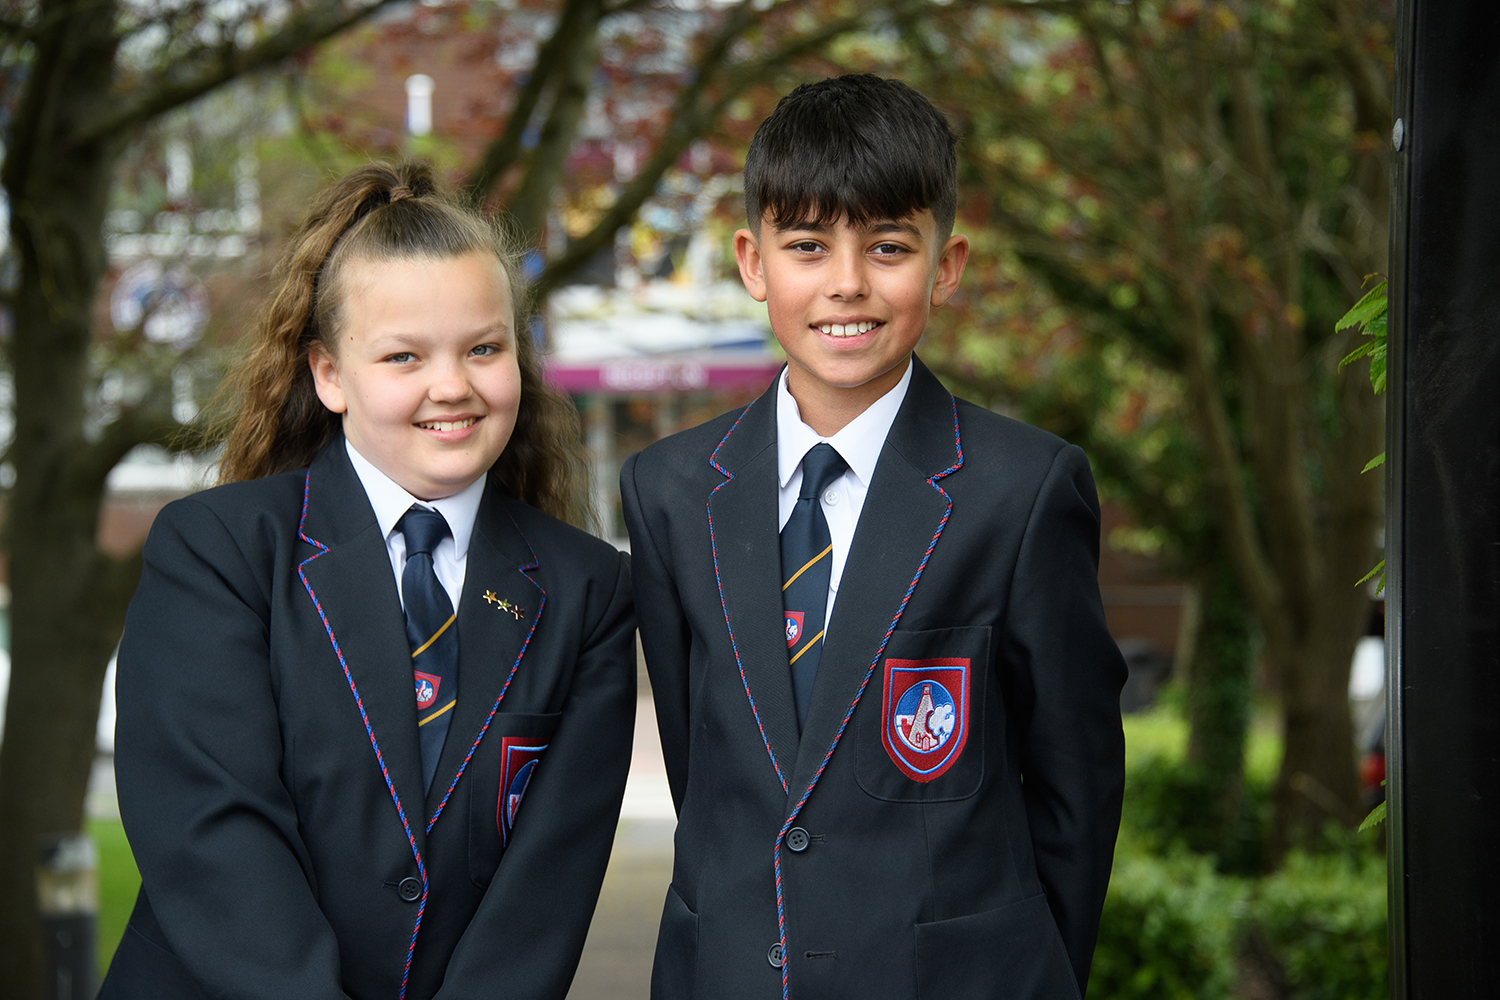 Two students in uniform smiling in front of school entrance